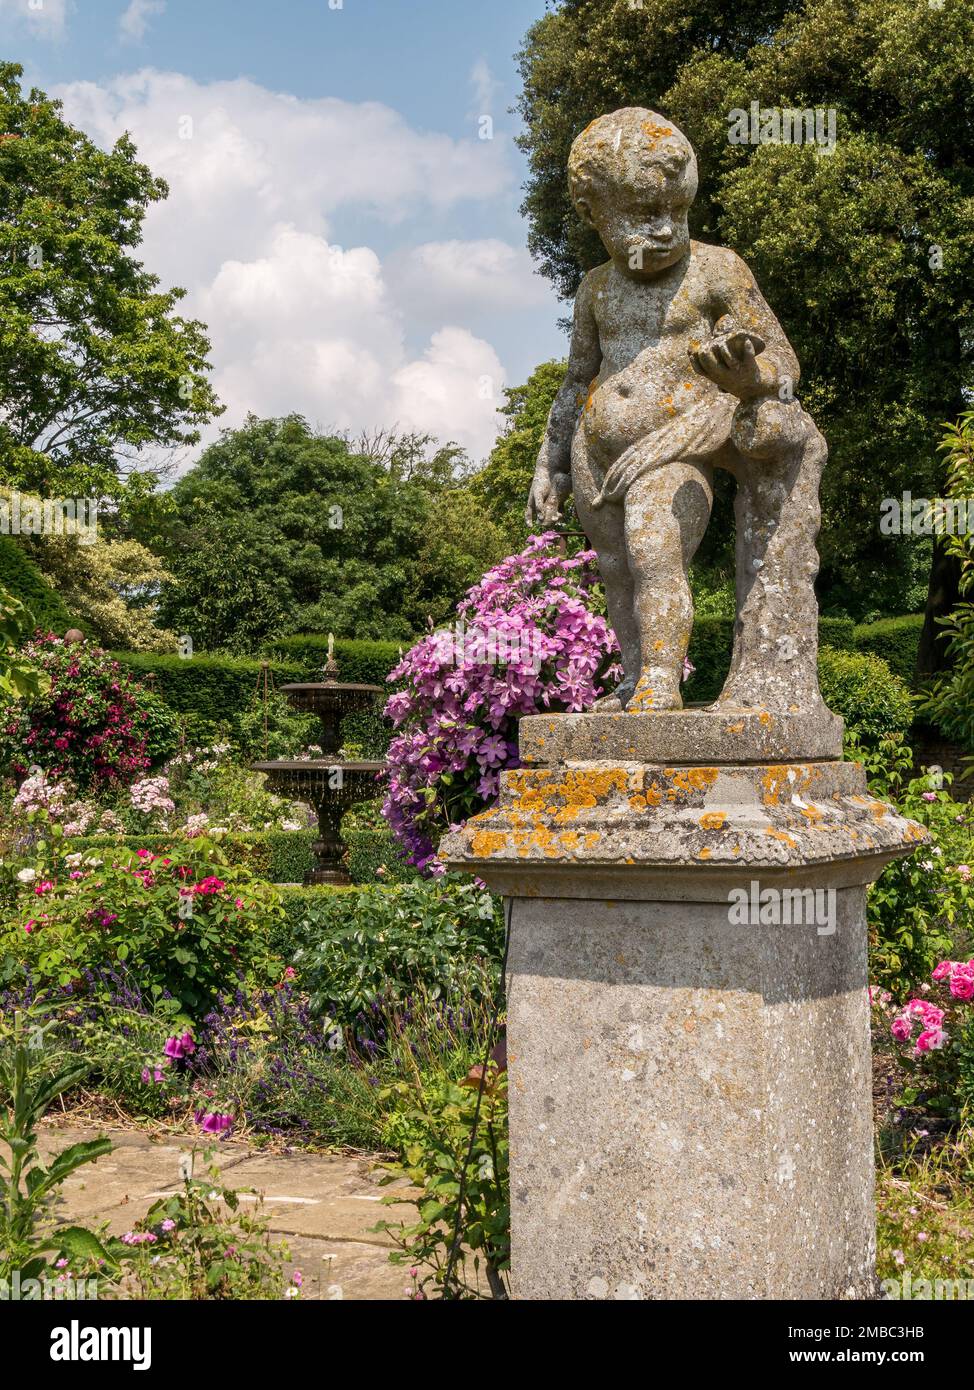 Ornamental stone cherub statue in the Rose garden at Belvoir Castle,  Leicestershire, England, UK Stock Photo